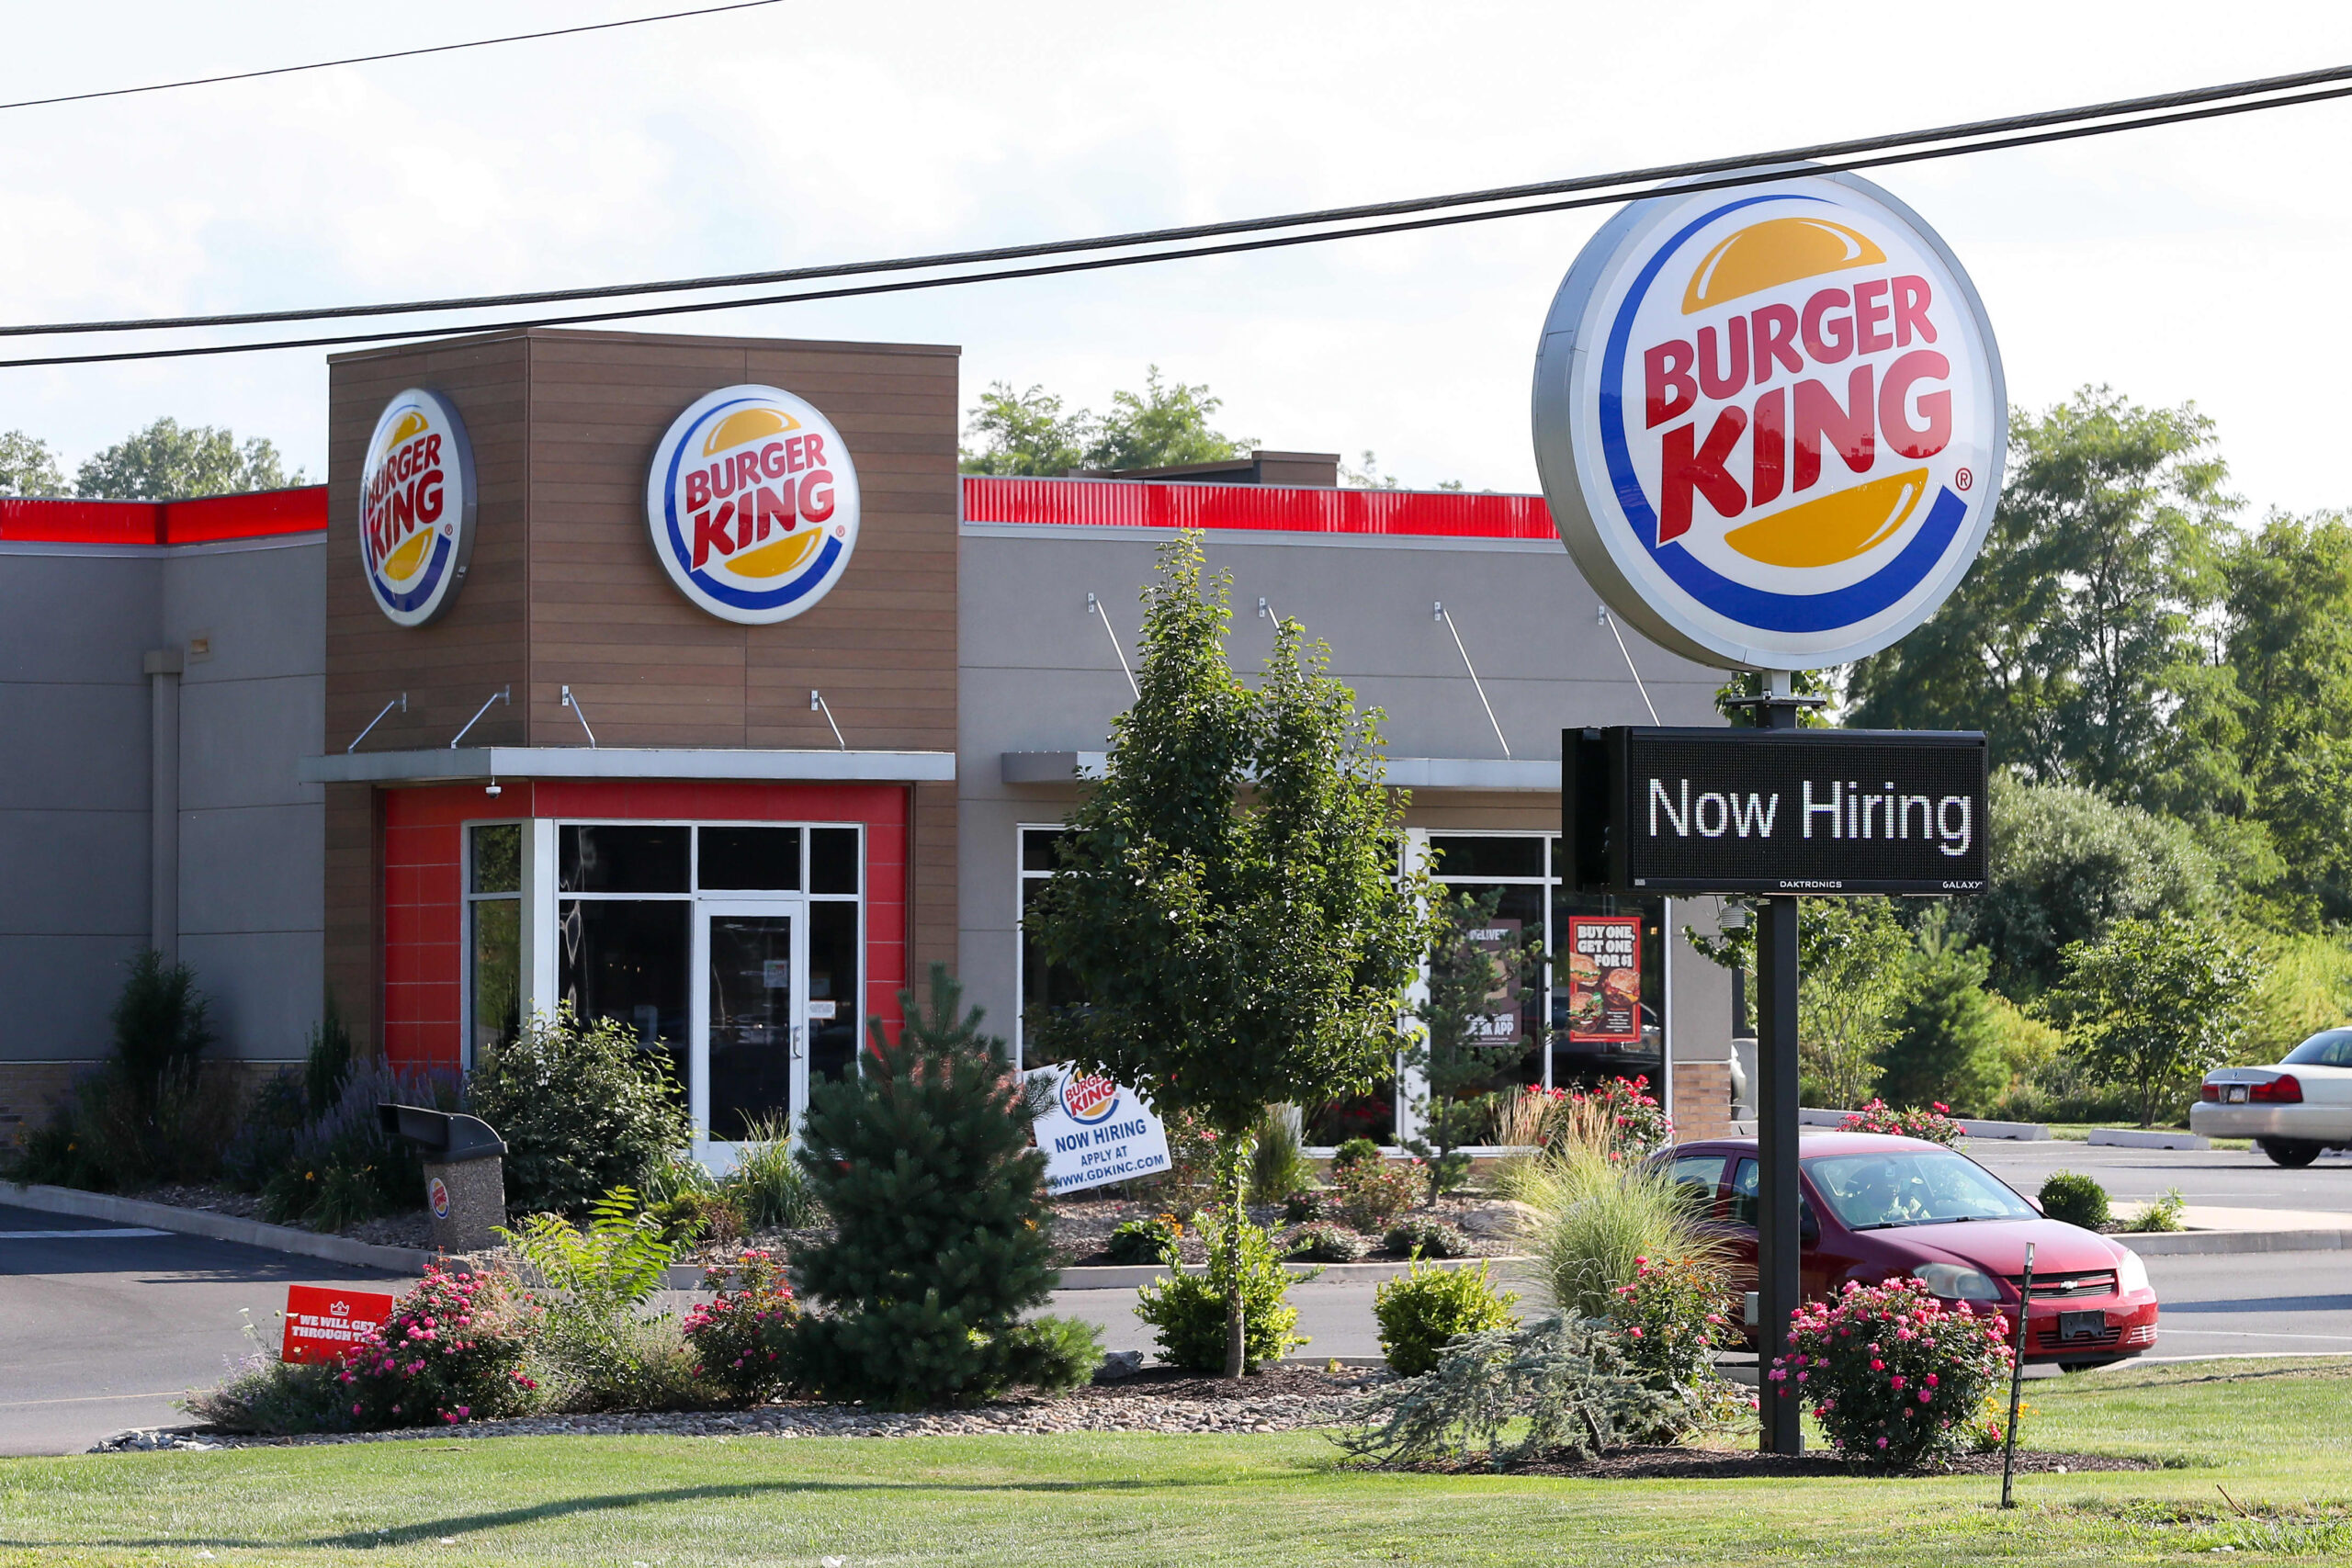 Burger King: Pricing Of Burger King Meals In 2023